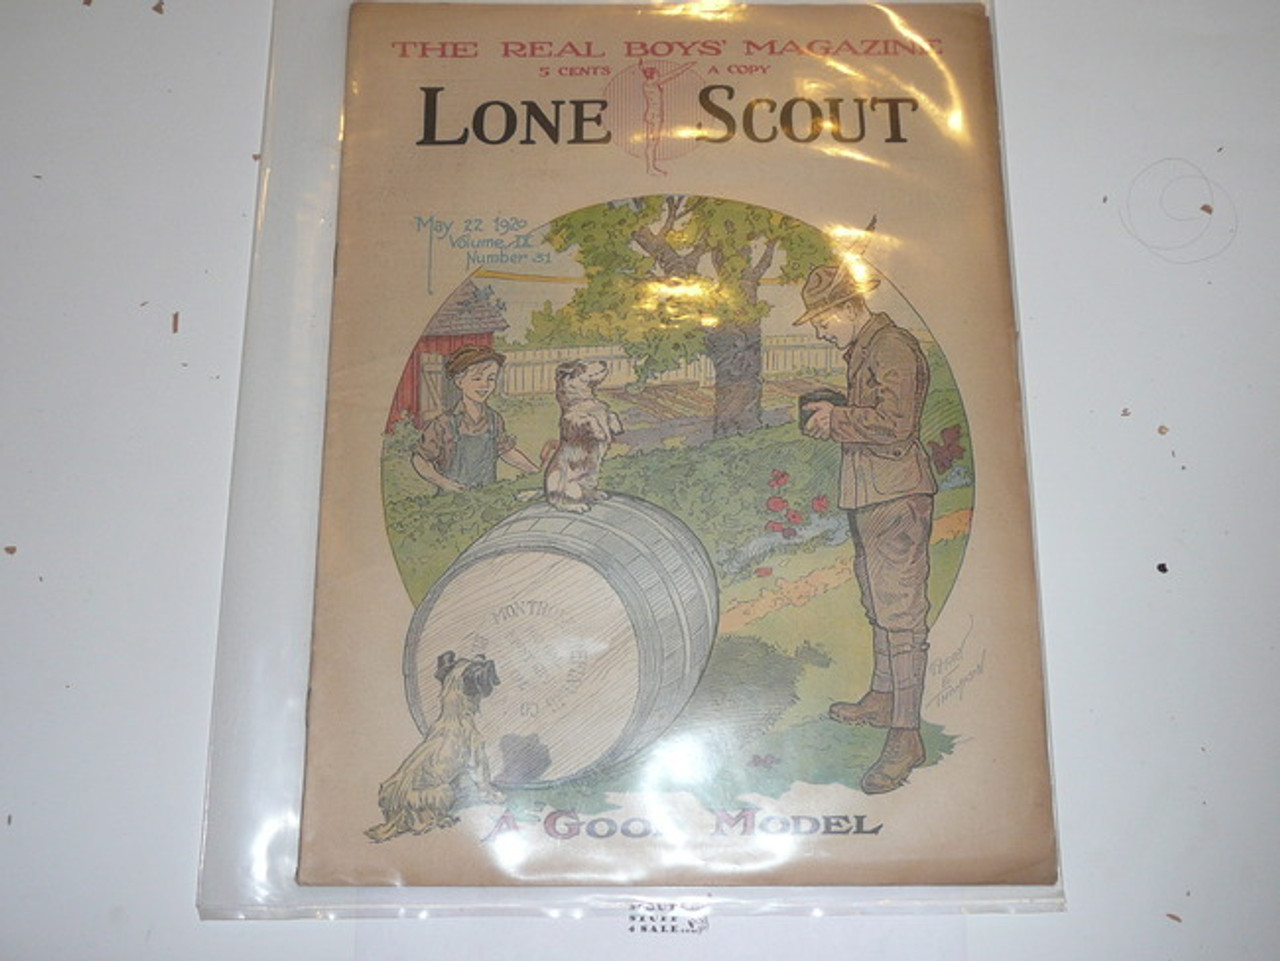 1920 Lone Scout Magazine, May 22, Vol 9 #31